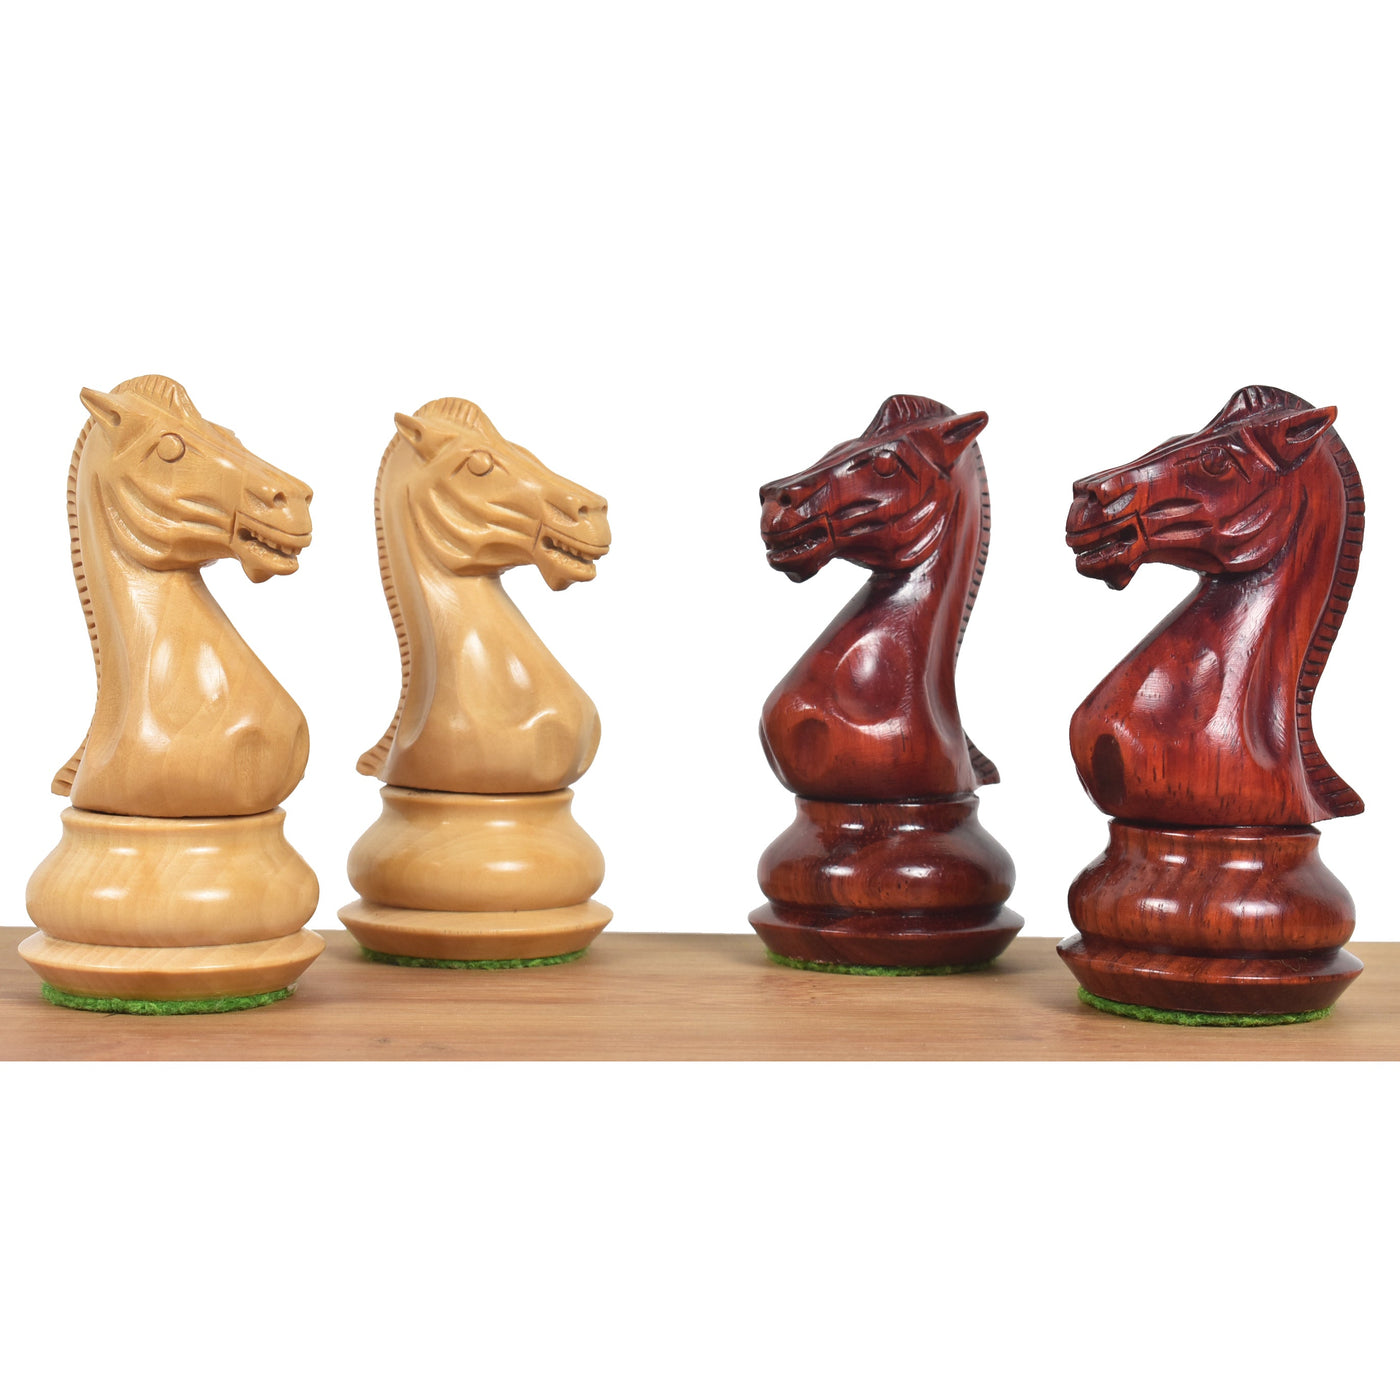 Combo of 4.1" Chamfered Base Staunton Chess Set - Pieces in Bud Rosewood with Board and Box